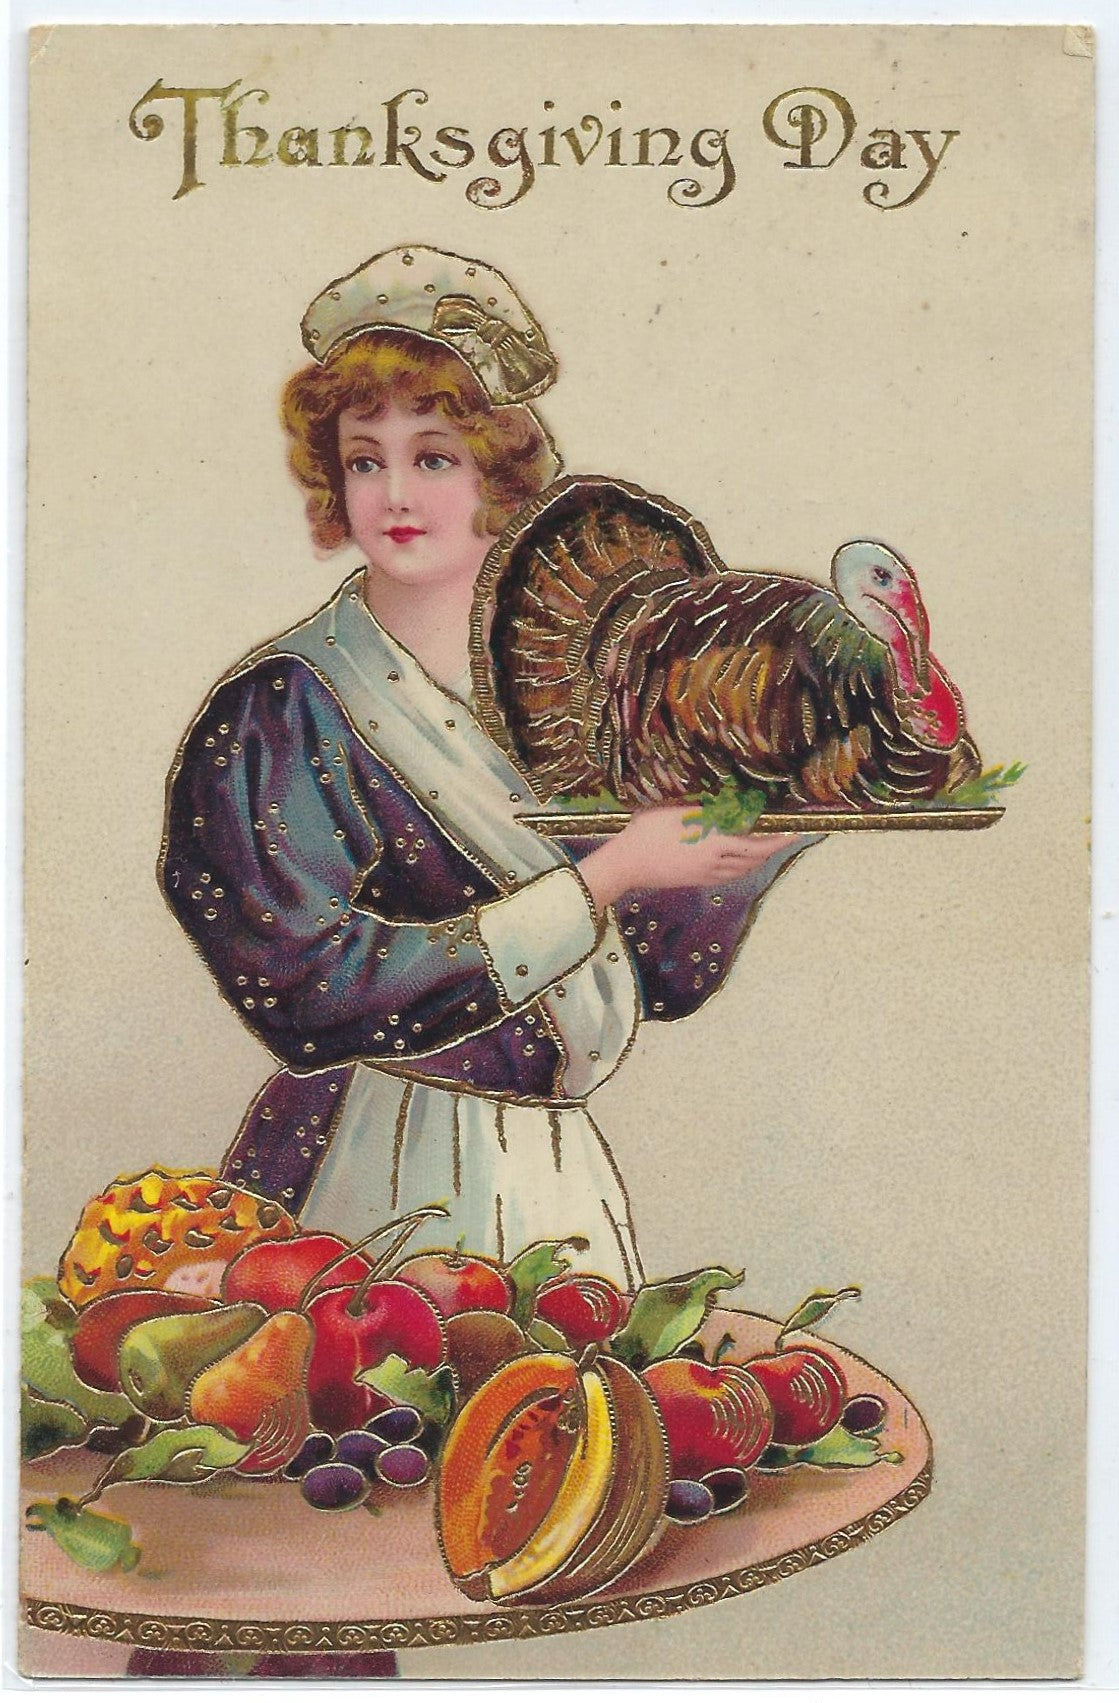 Thanksgiving Postcard Gold Highlighted Embossed Card with Woman Serving Turkey Dinner Series 278